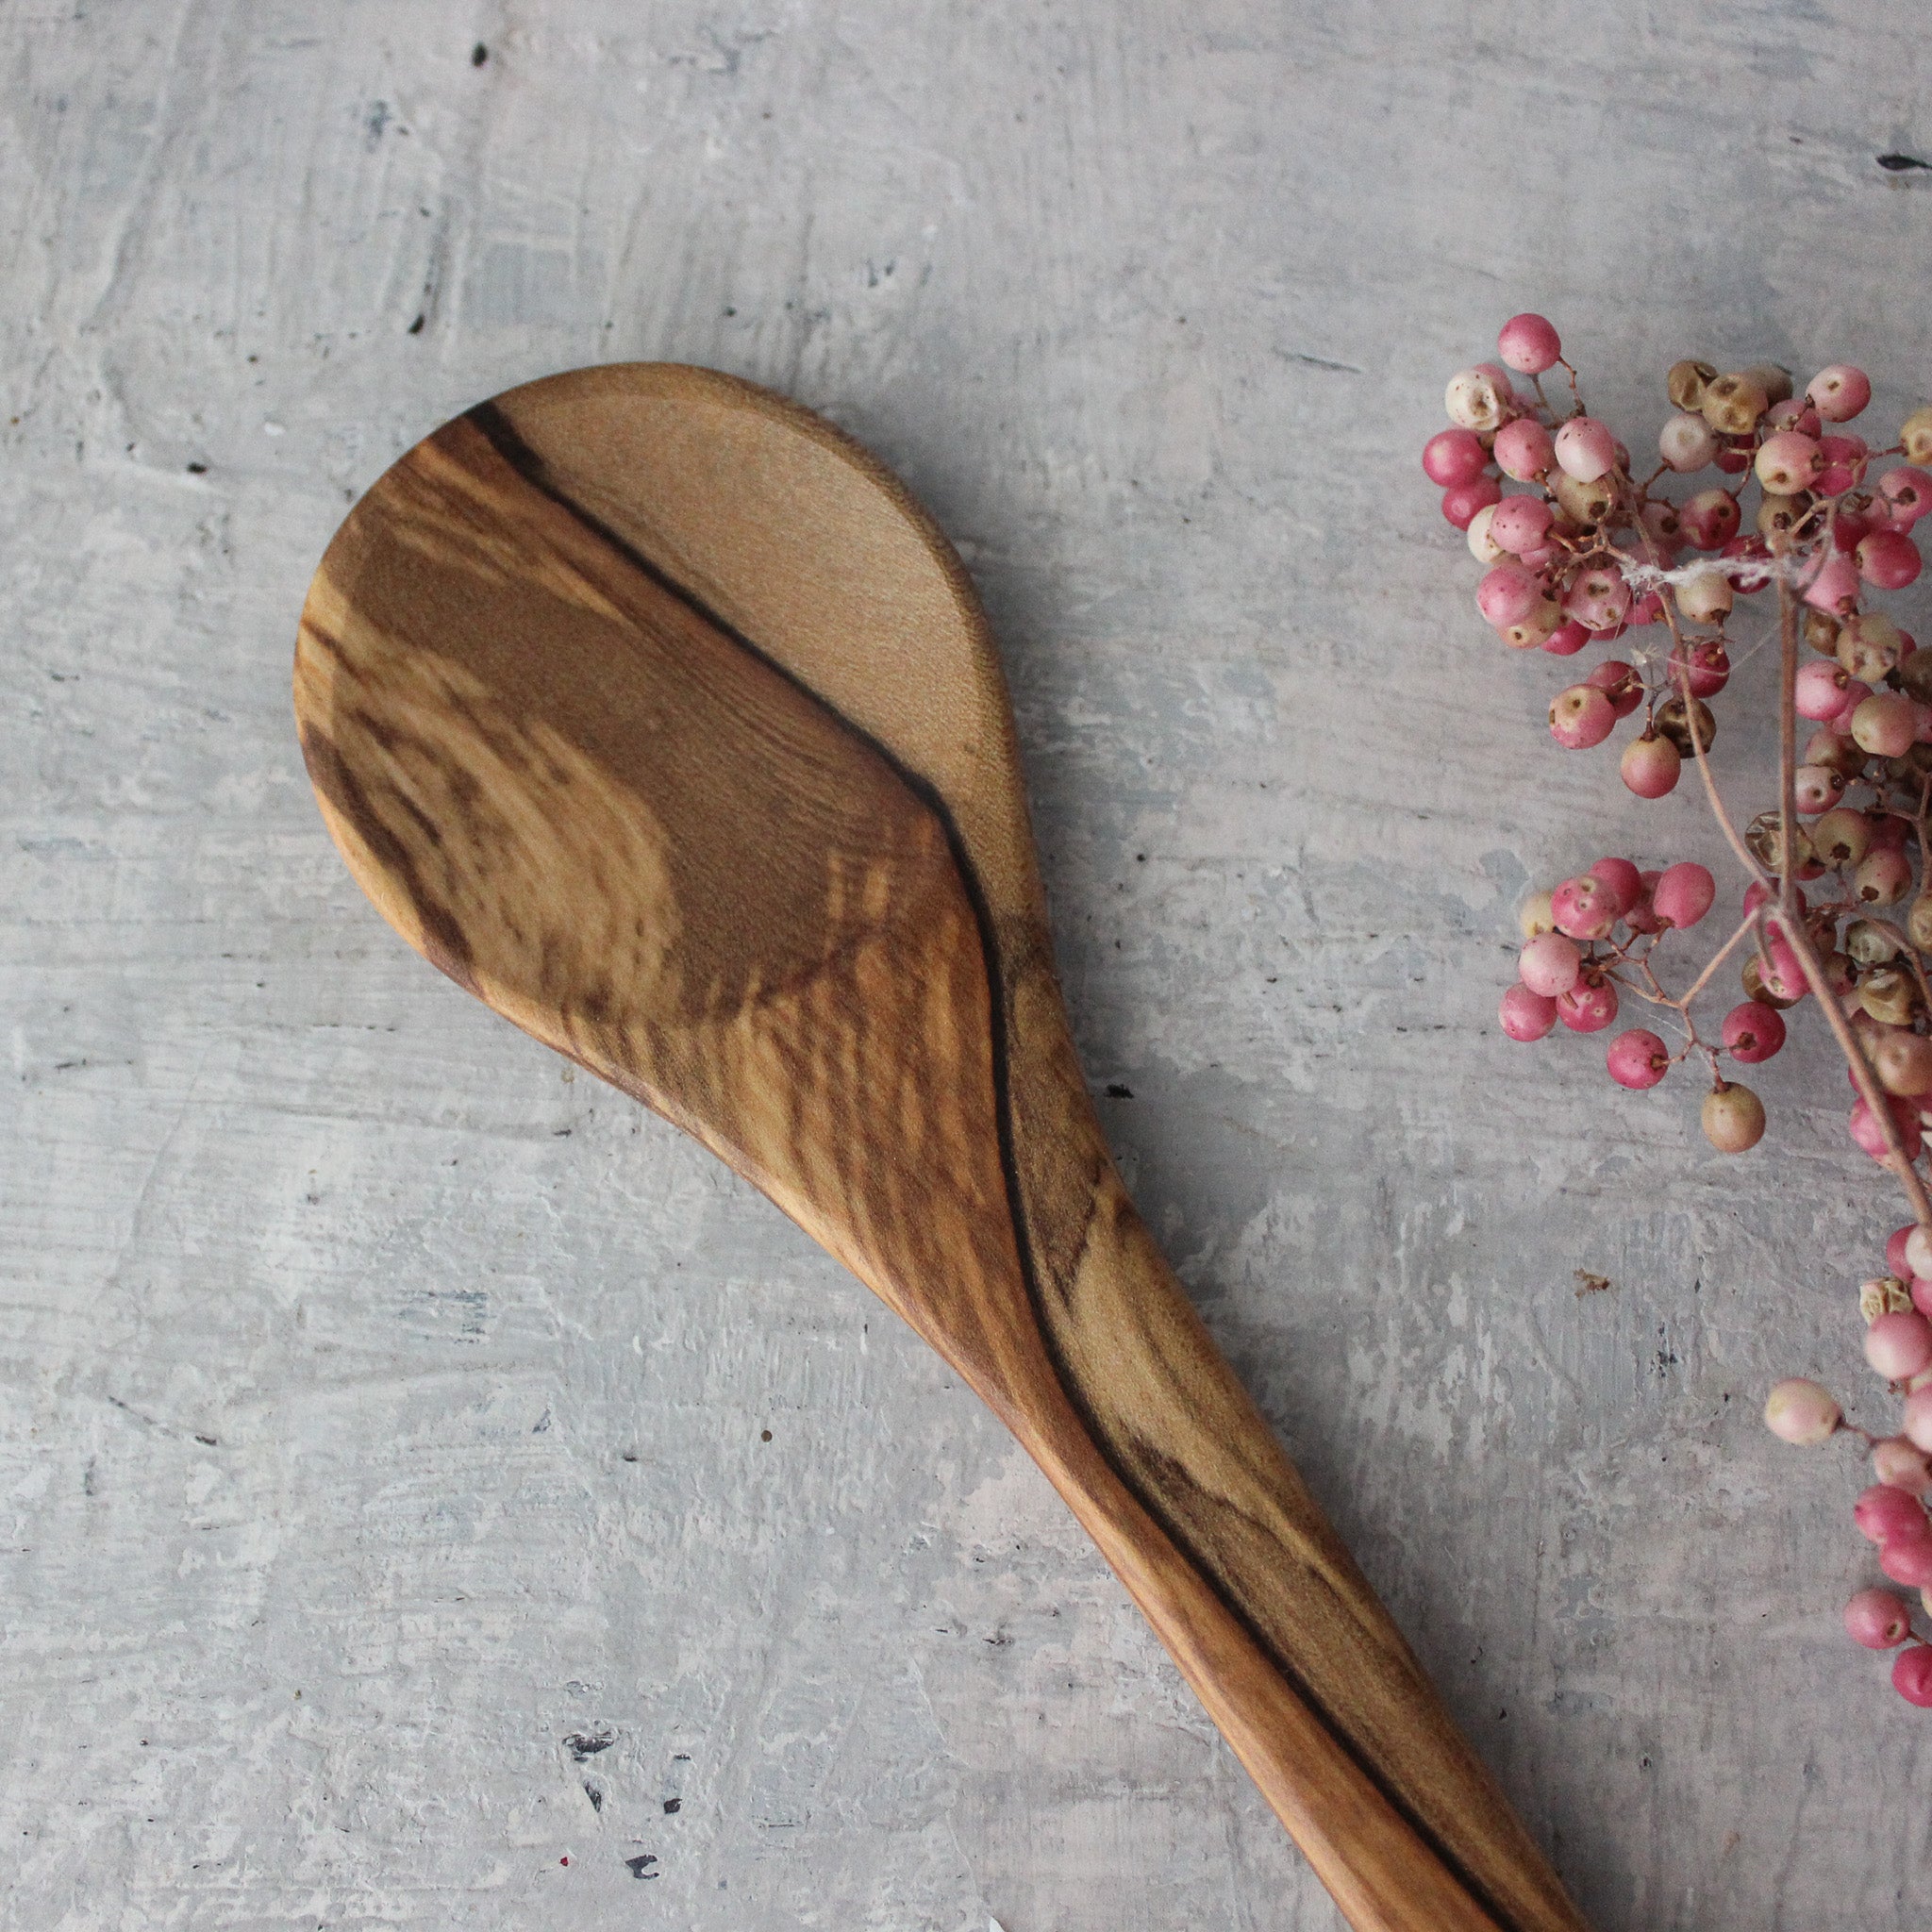 Australian Timber Wooden Spoons - Tribe Castlemaine